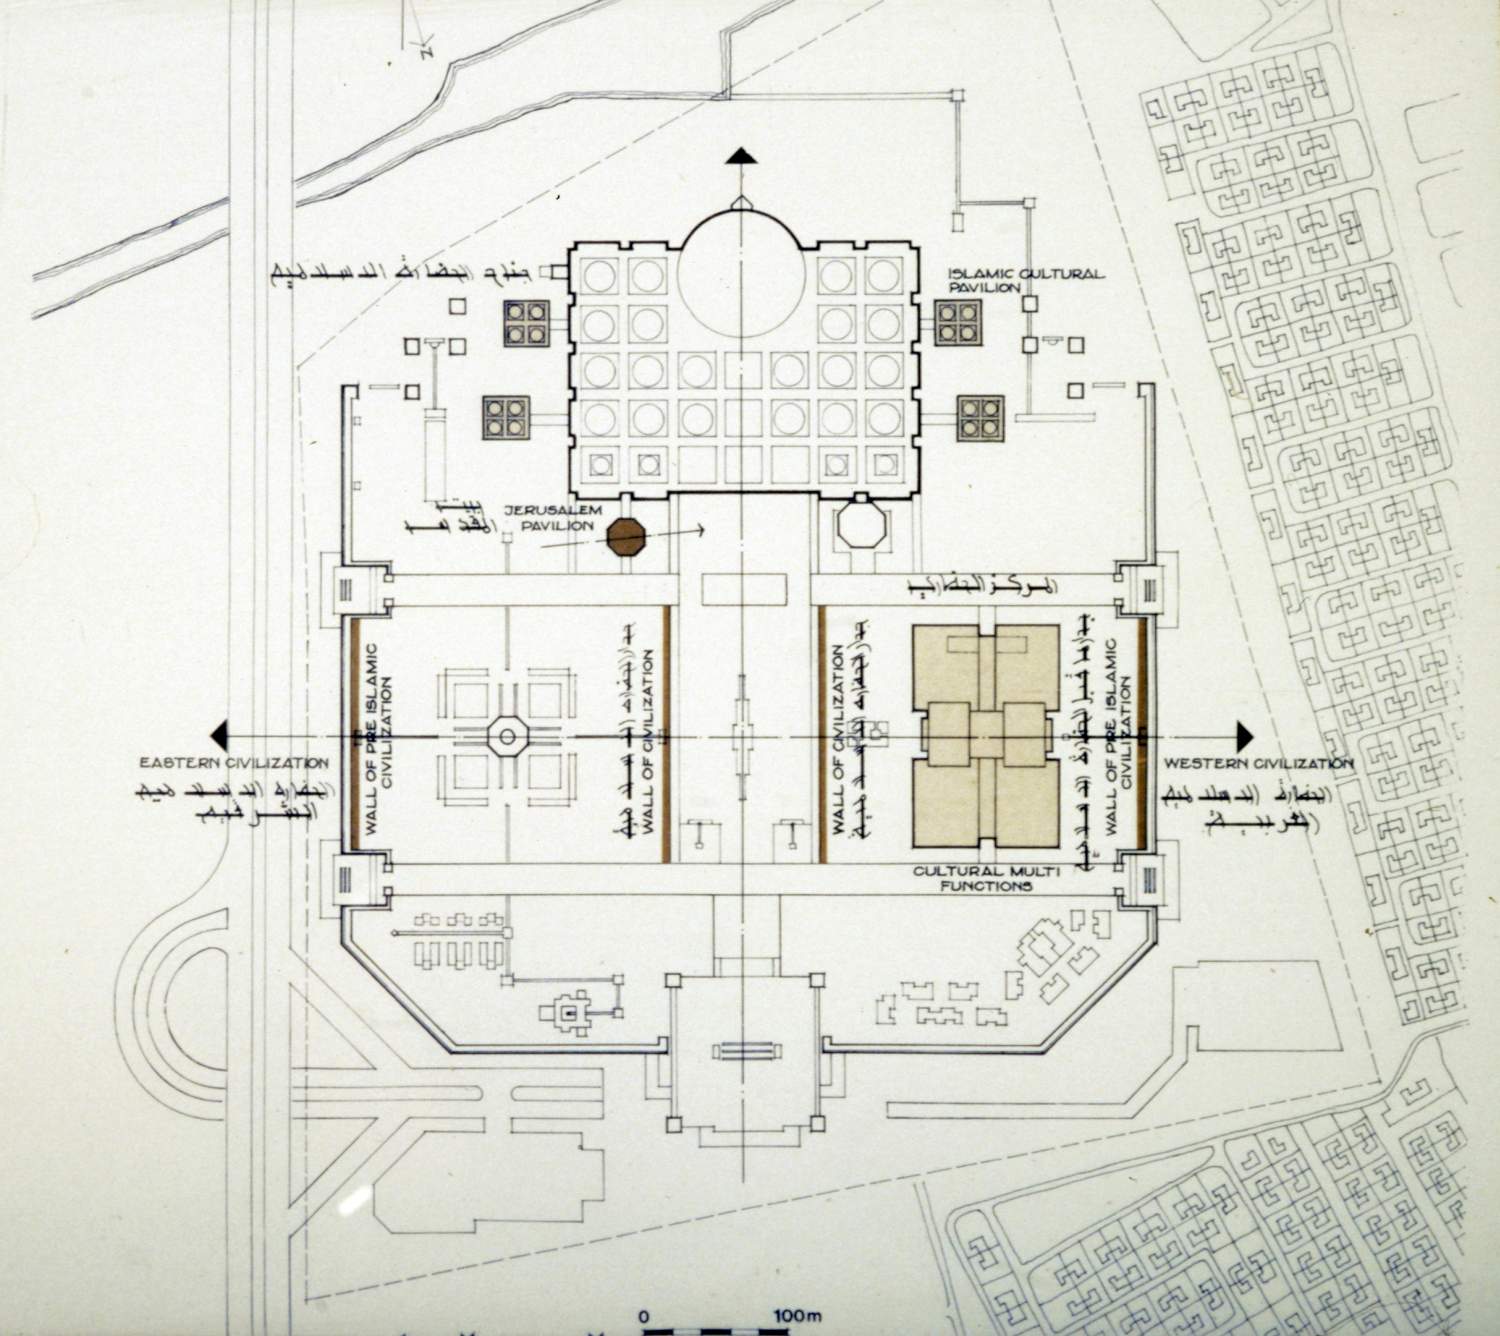 Site plan, Cultural Synthesis, includes locations of the four "Walls of Civilization".